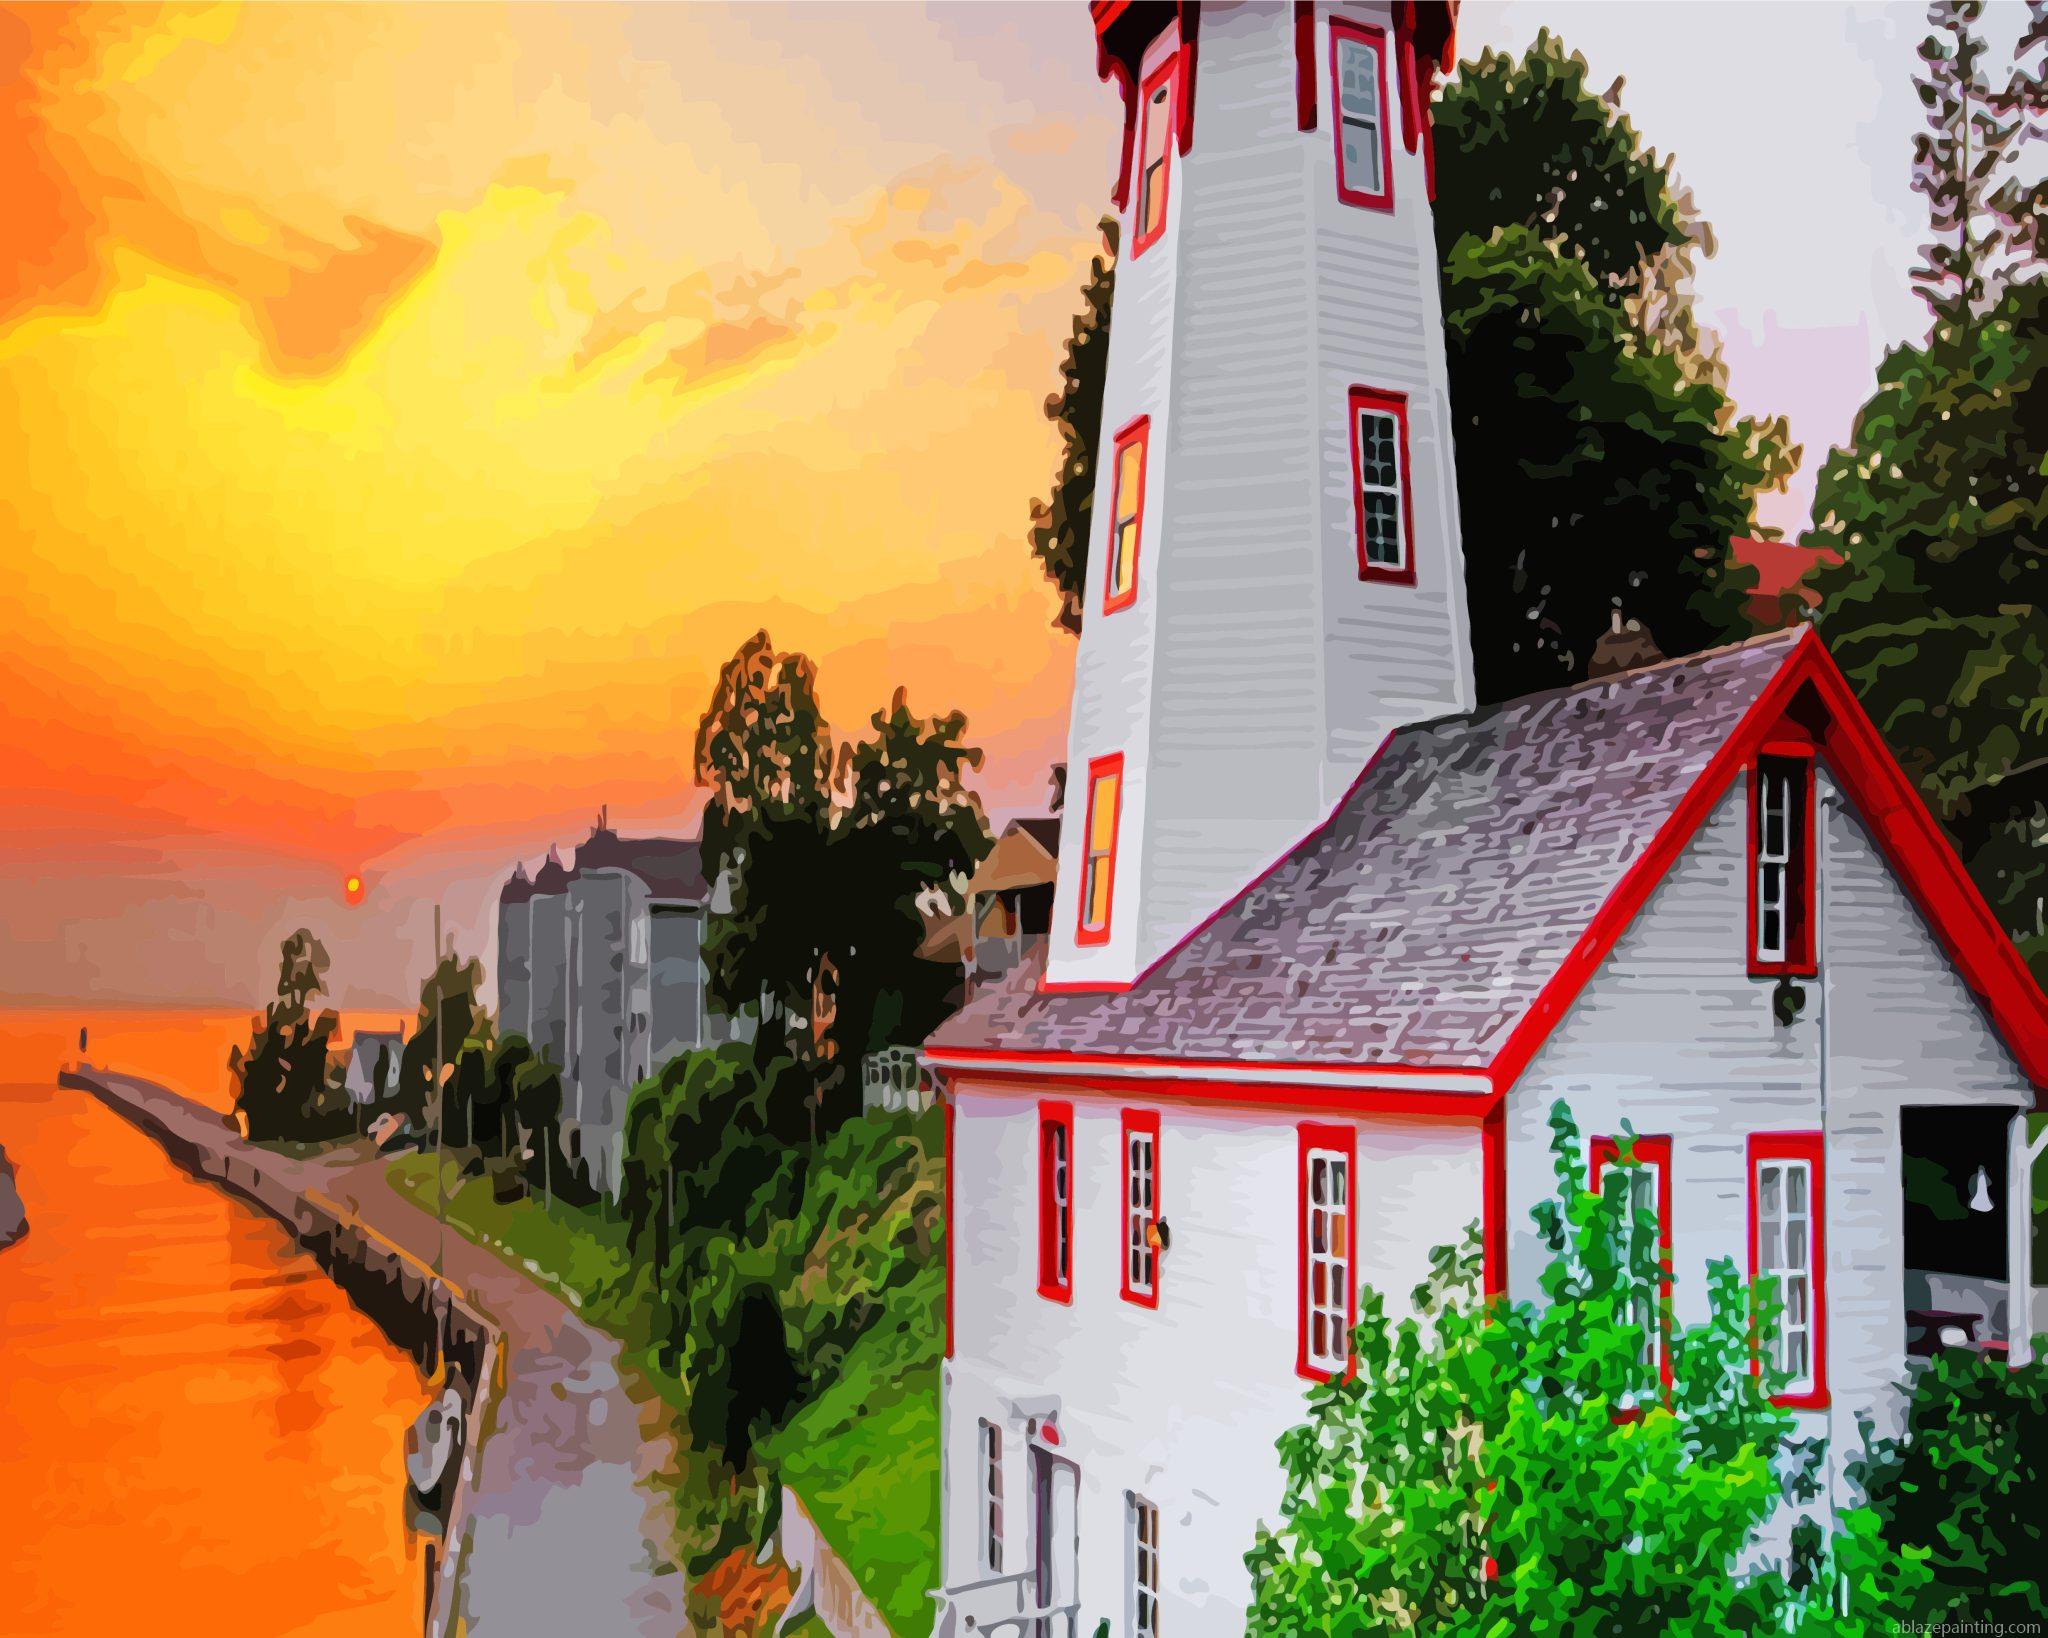 Kincardine Lighthouse At Sunset Paint By Numbers.jpg